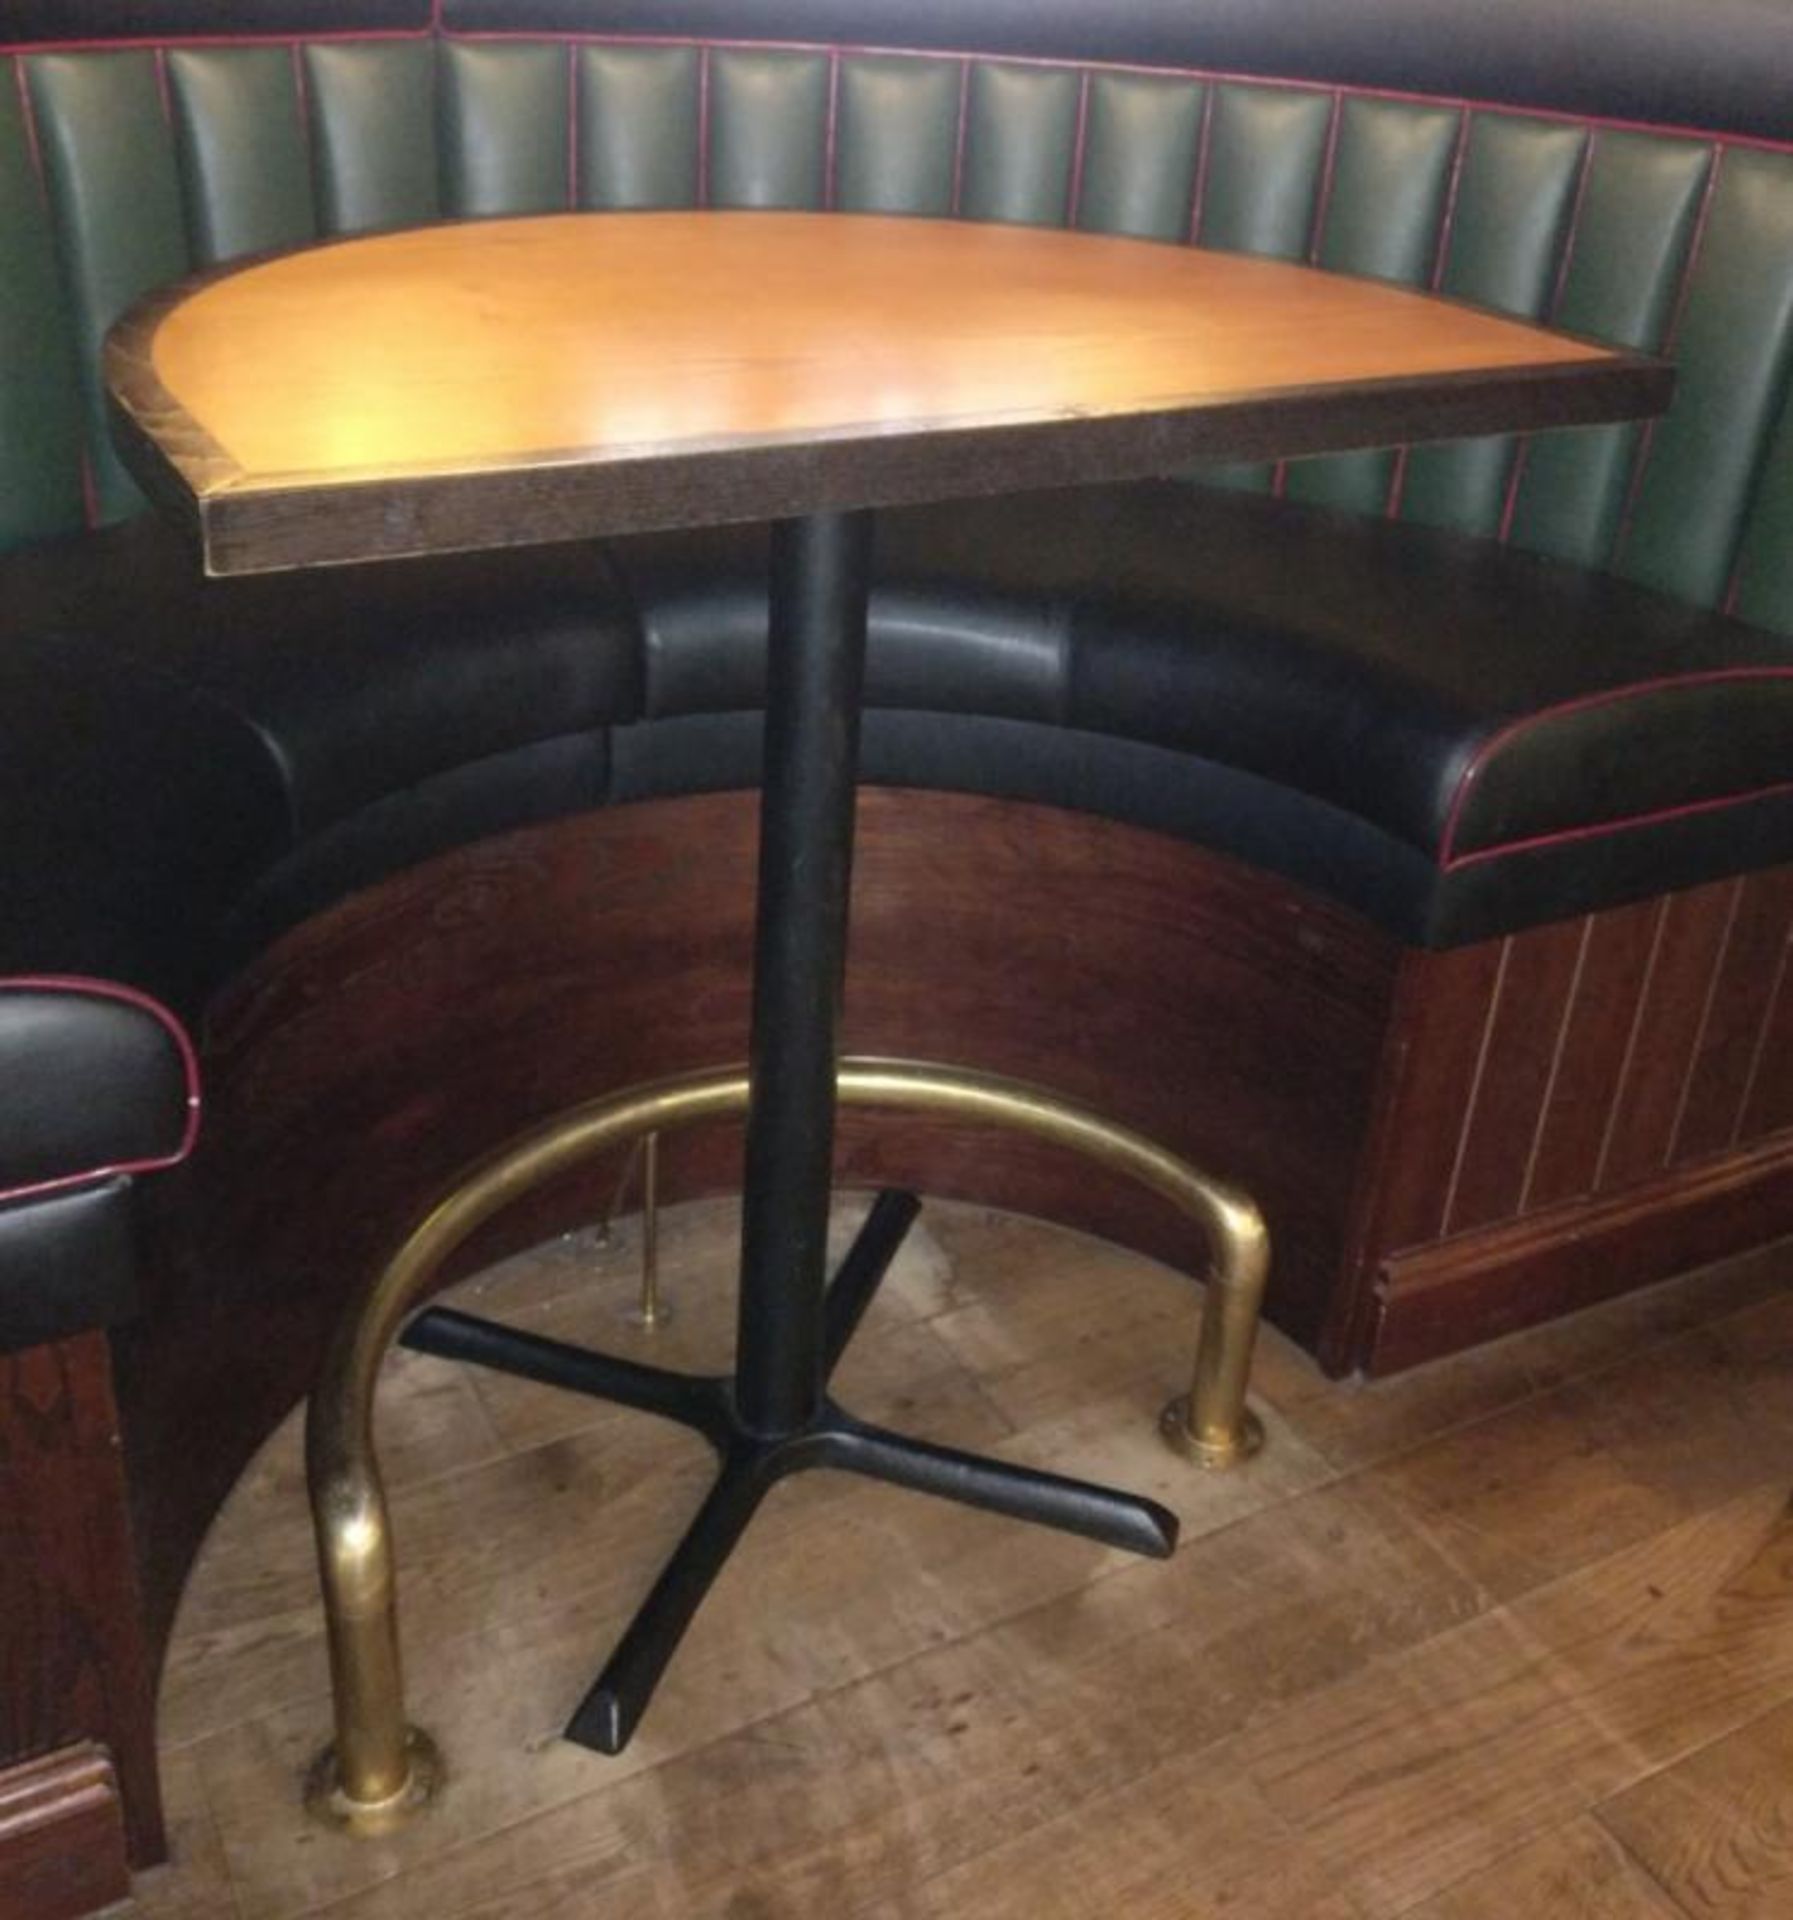 5 x Semi Circle Restaurant Poser Tables - Features Cast Iron Bases With Light Wood Tops and Dark